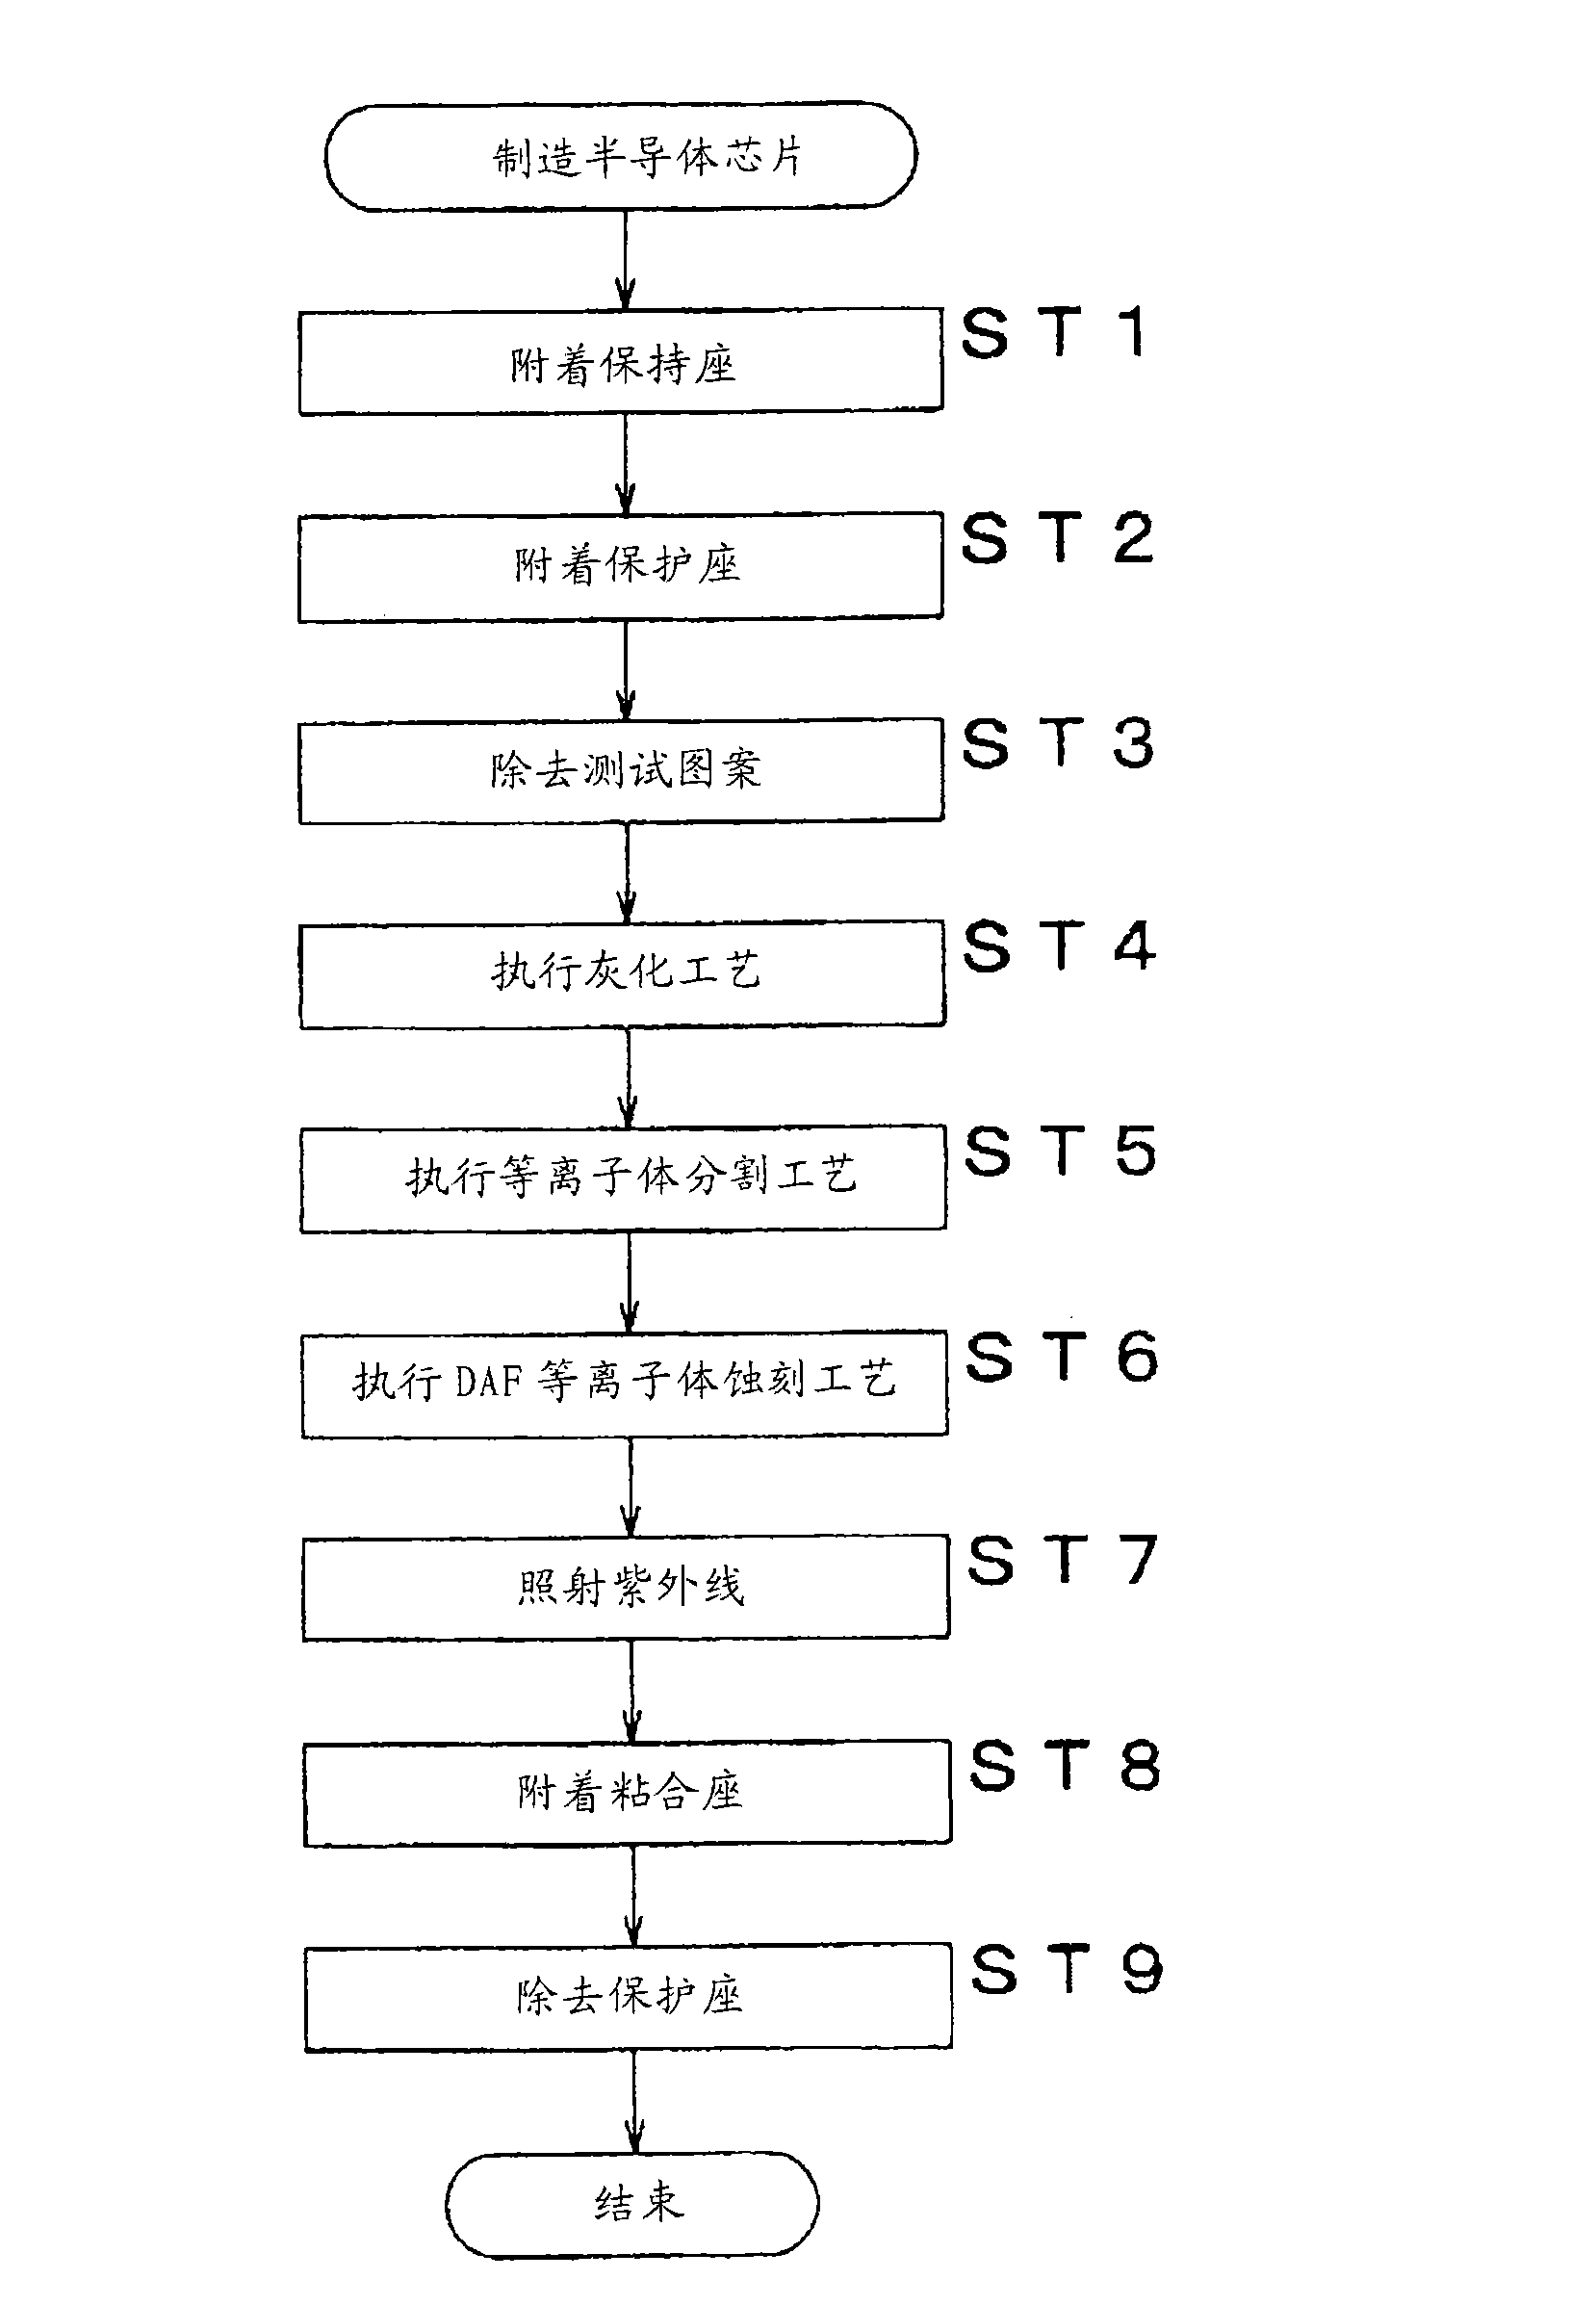 Method of manufacturing semiconductor chip